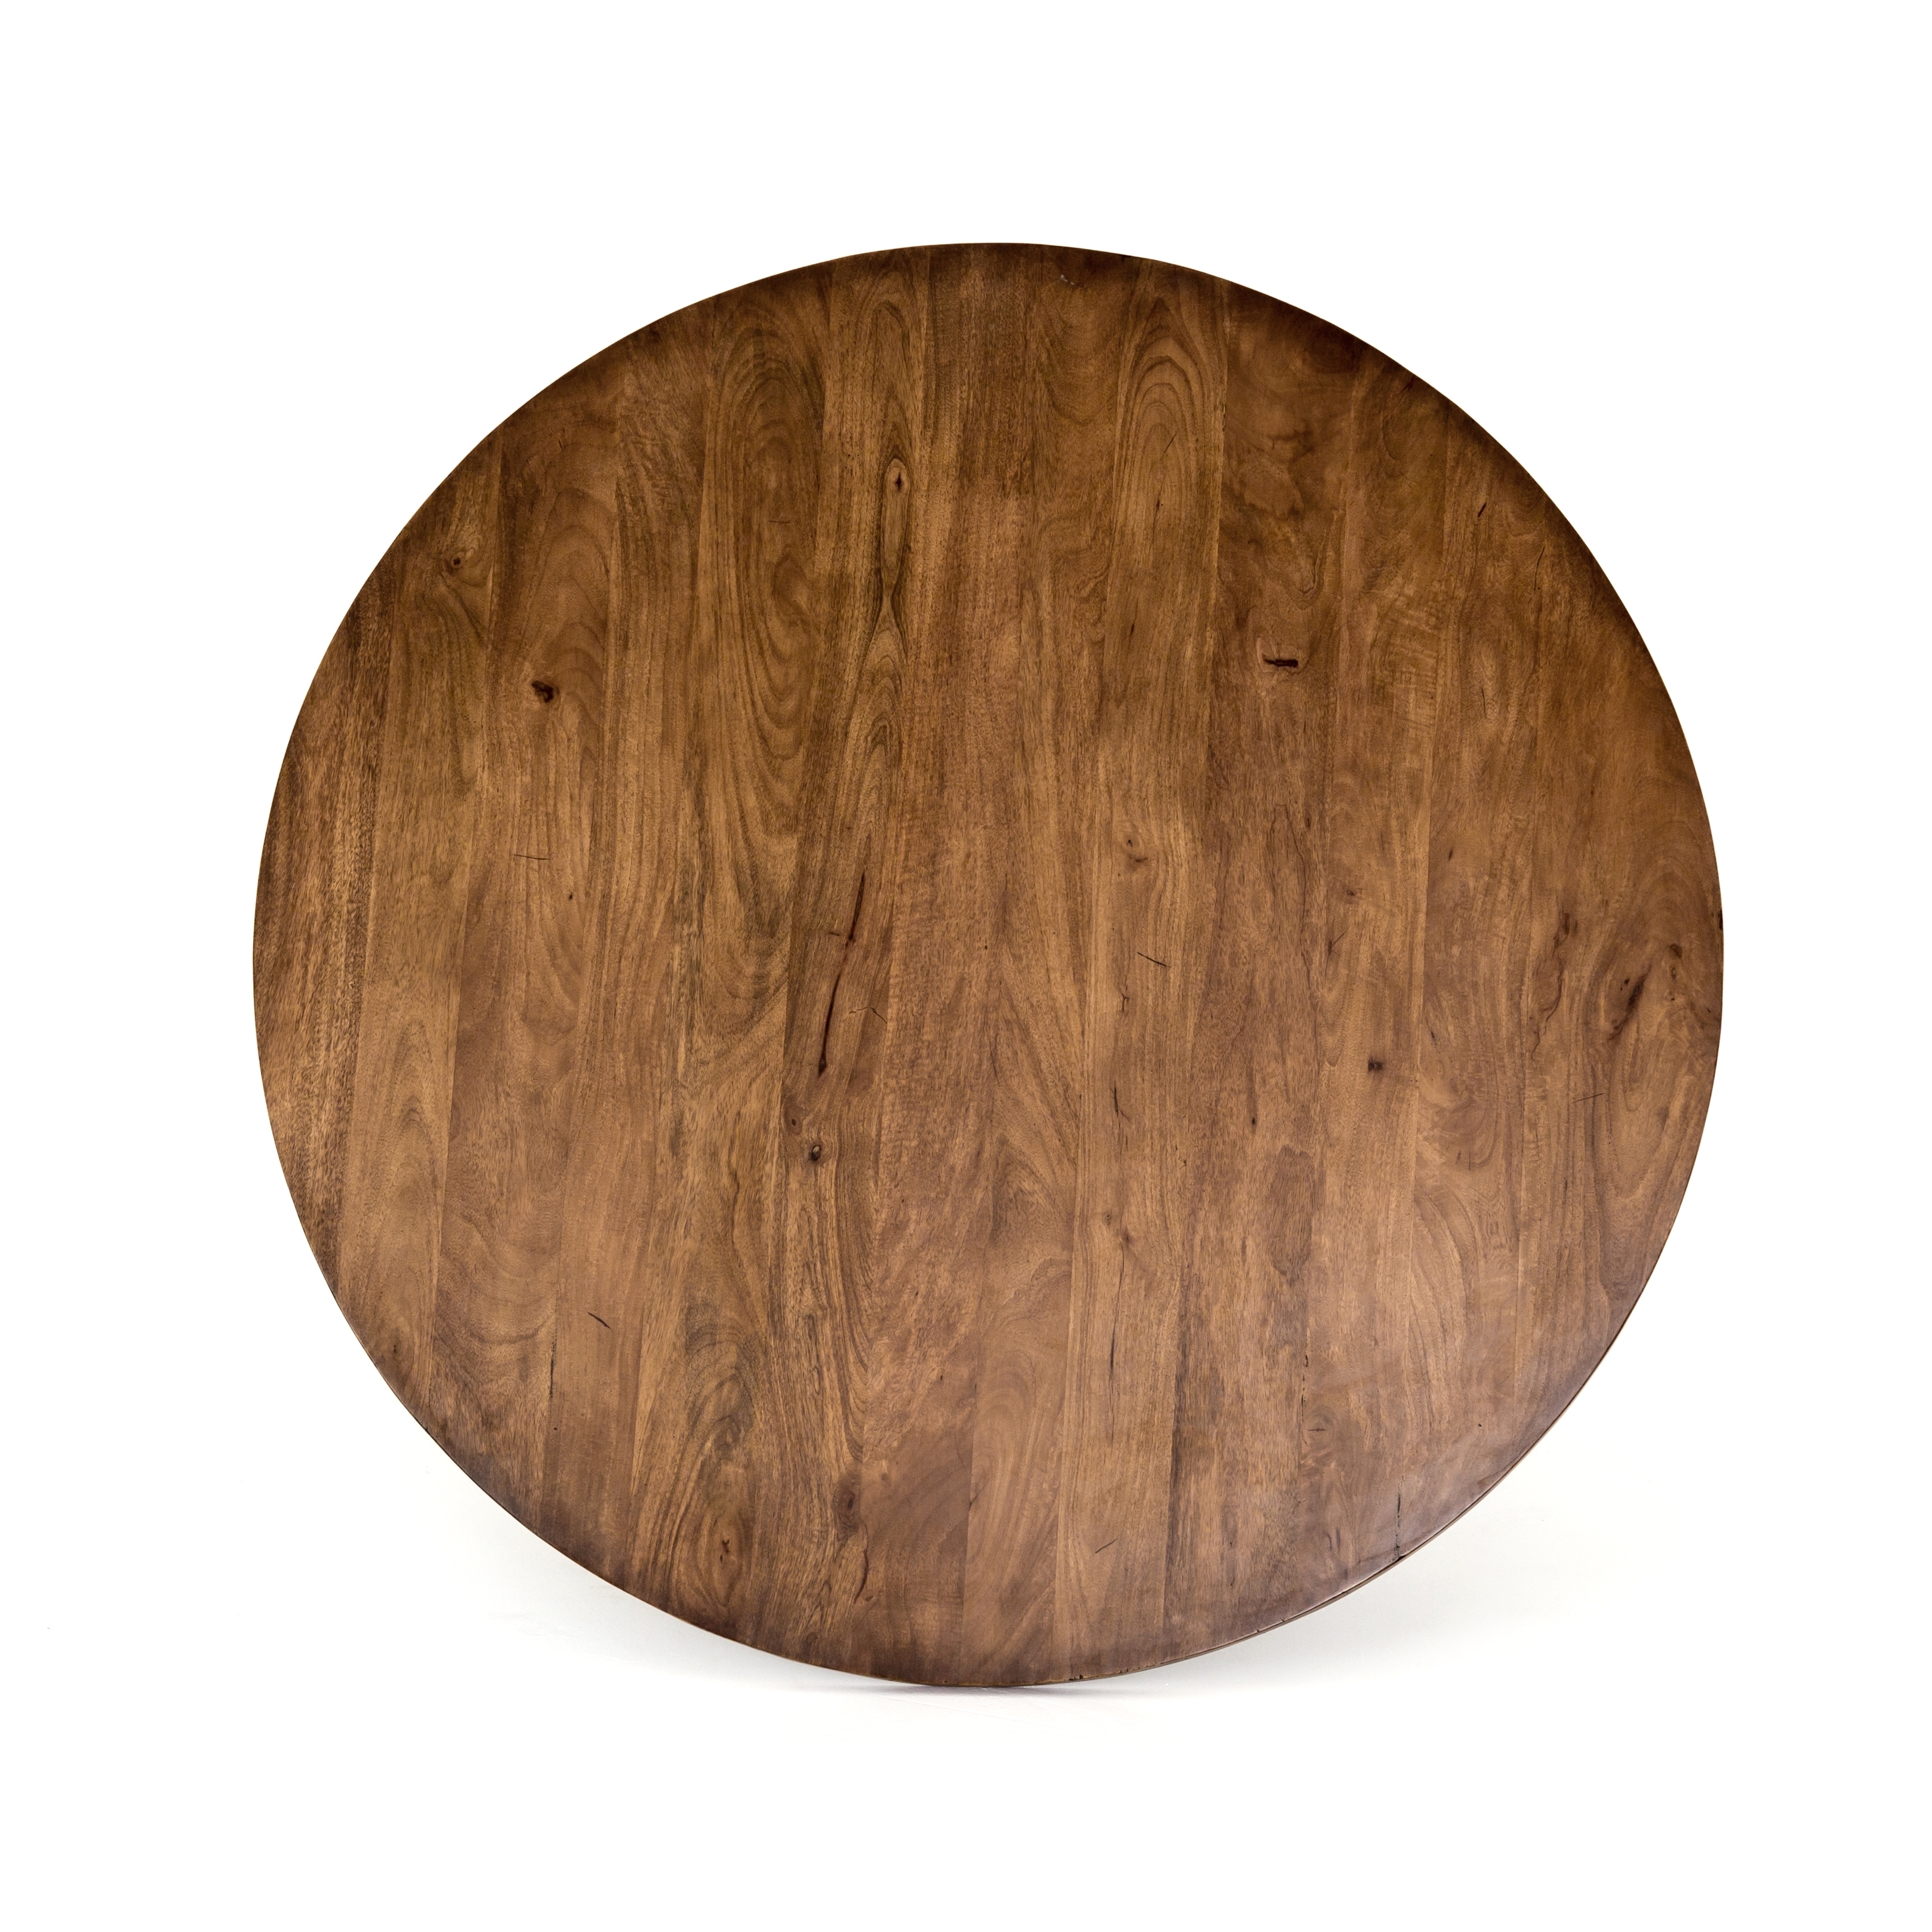 Maleva Round Dining Table, Reclaimed Wood - Image 8